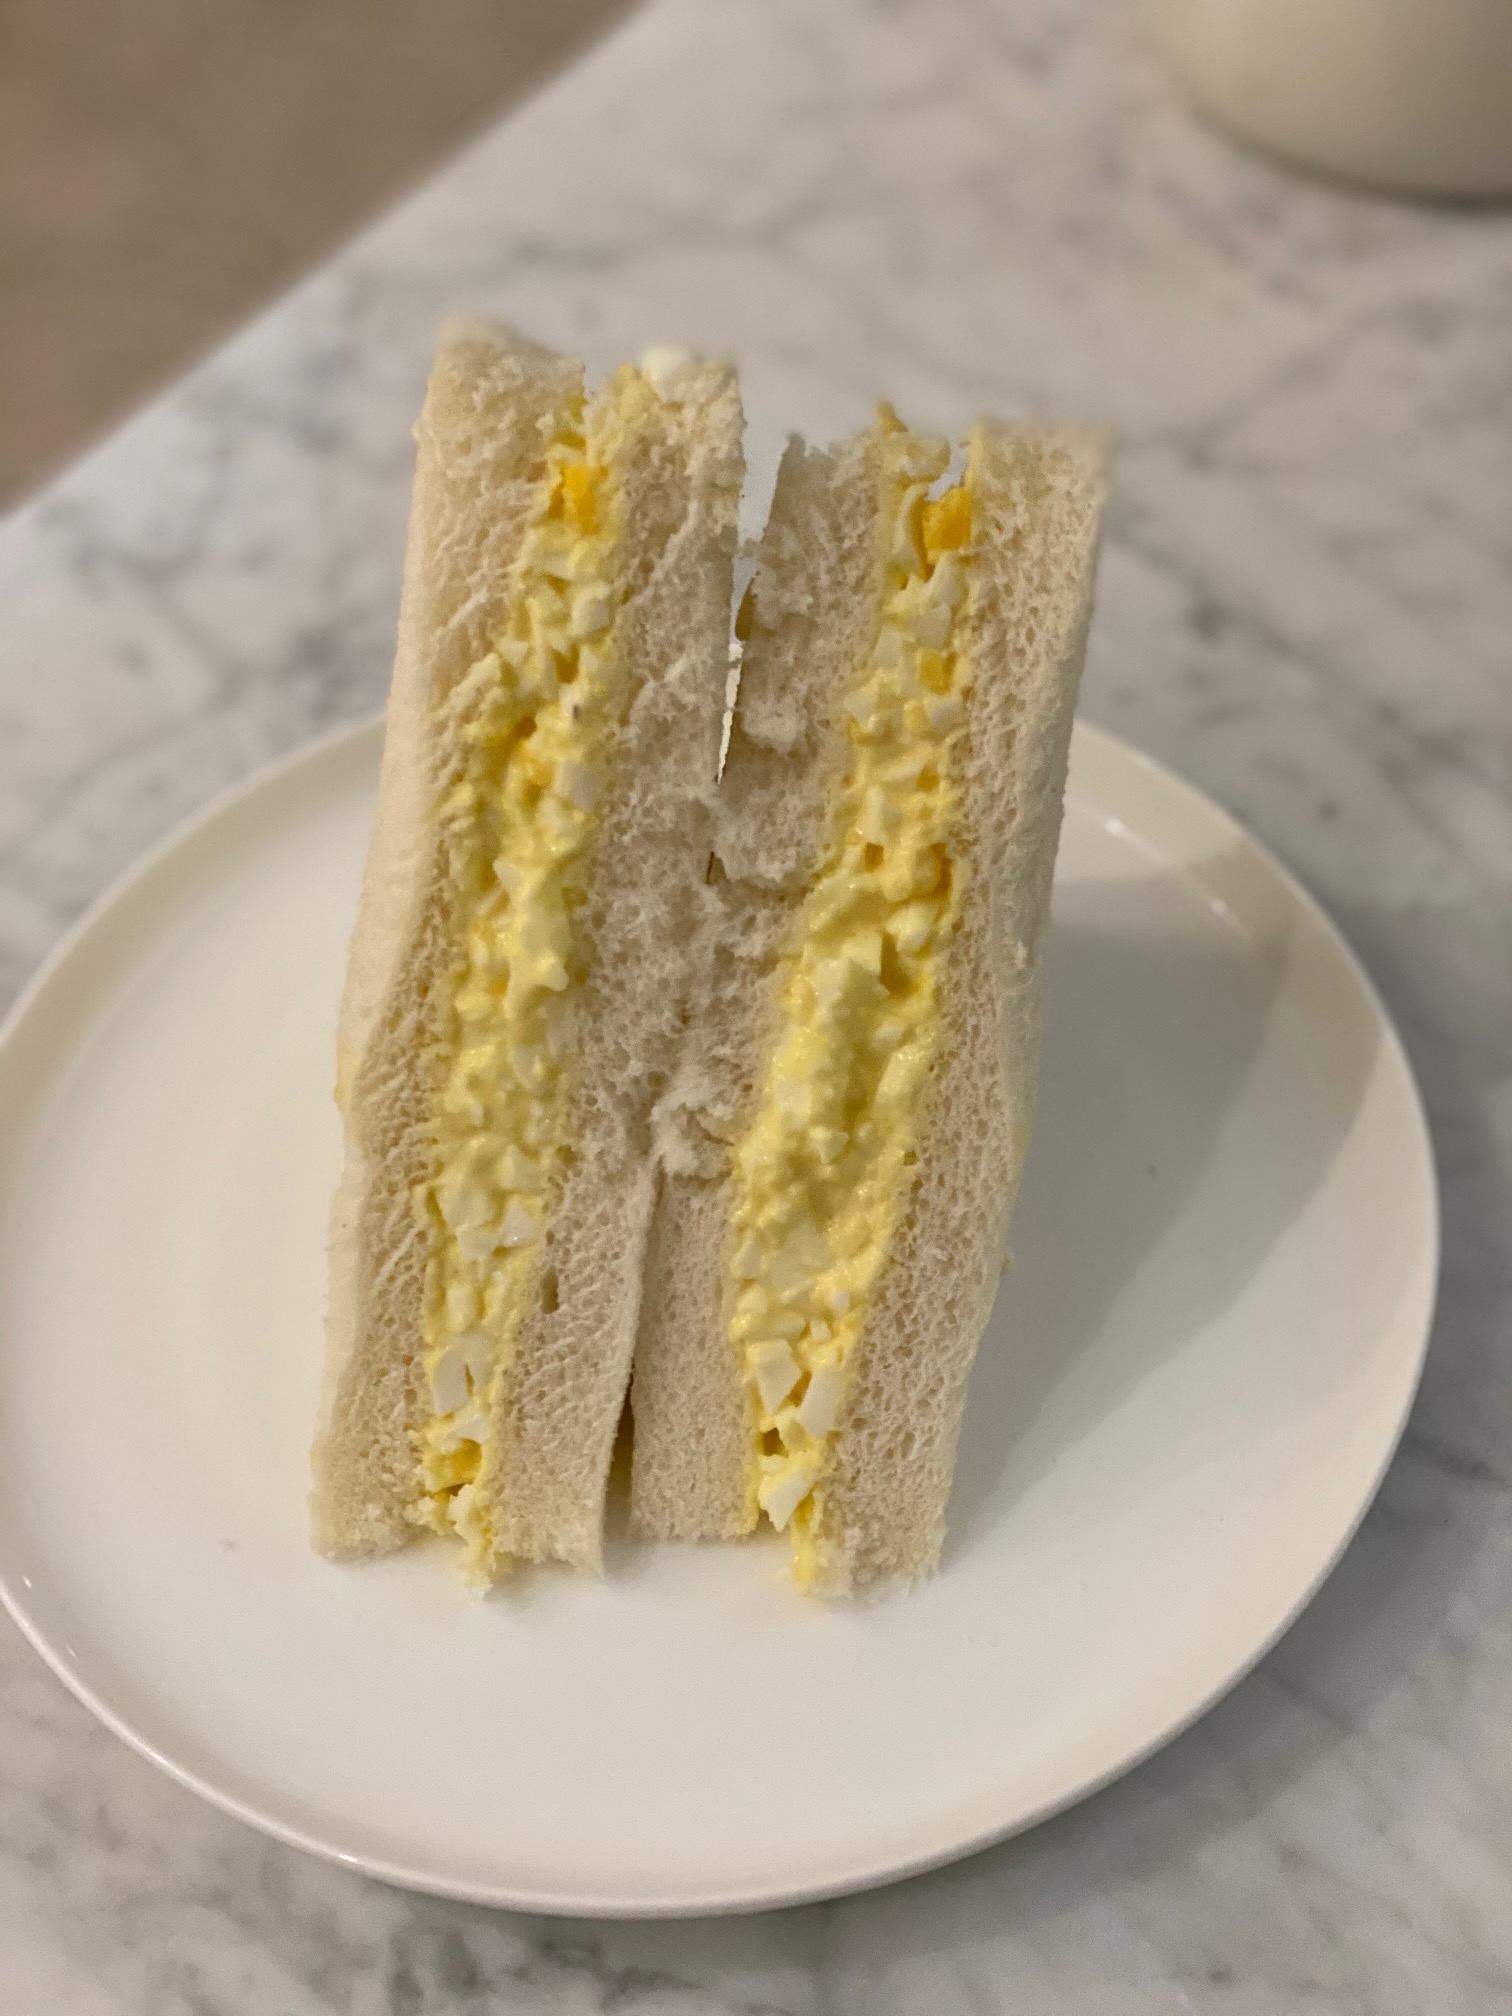 Egg salad sandwich with crusts removed, standing upright on a white plate